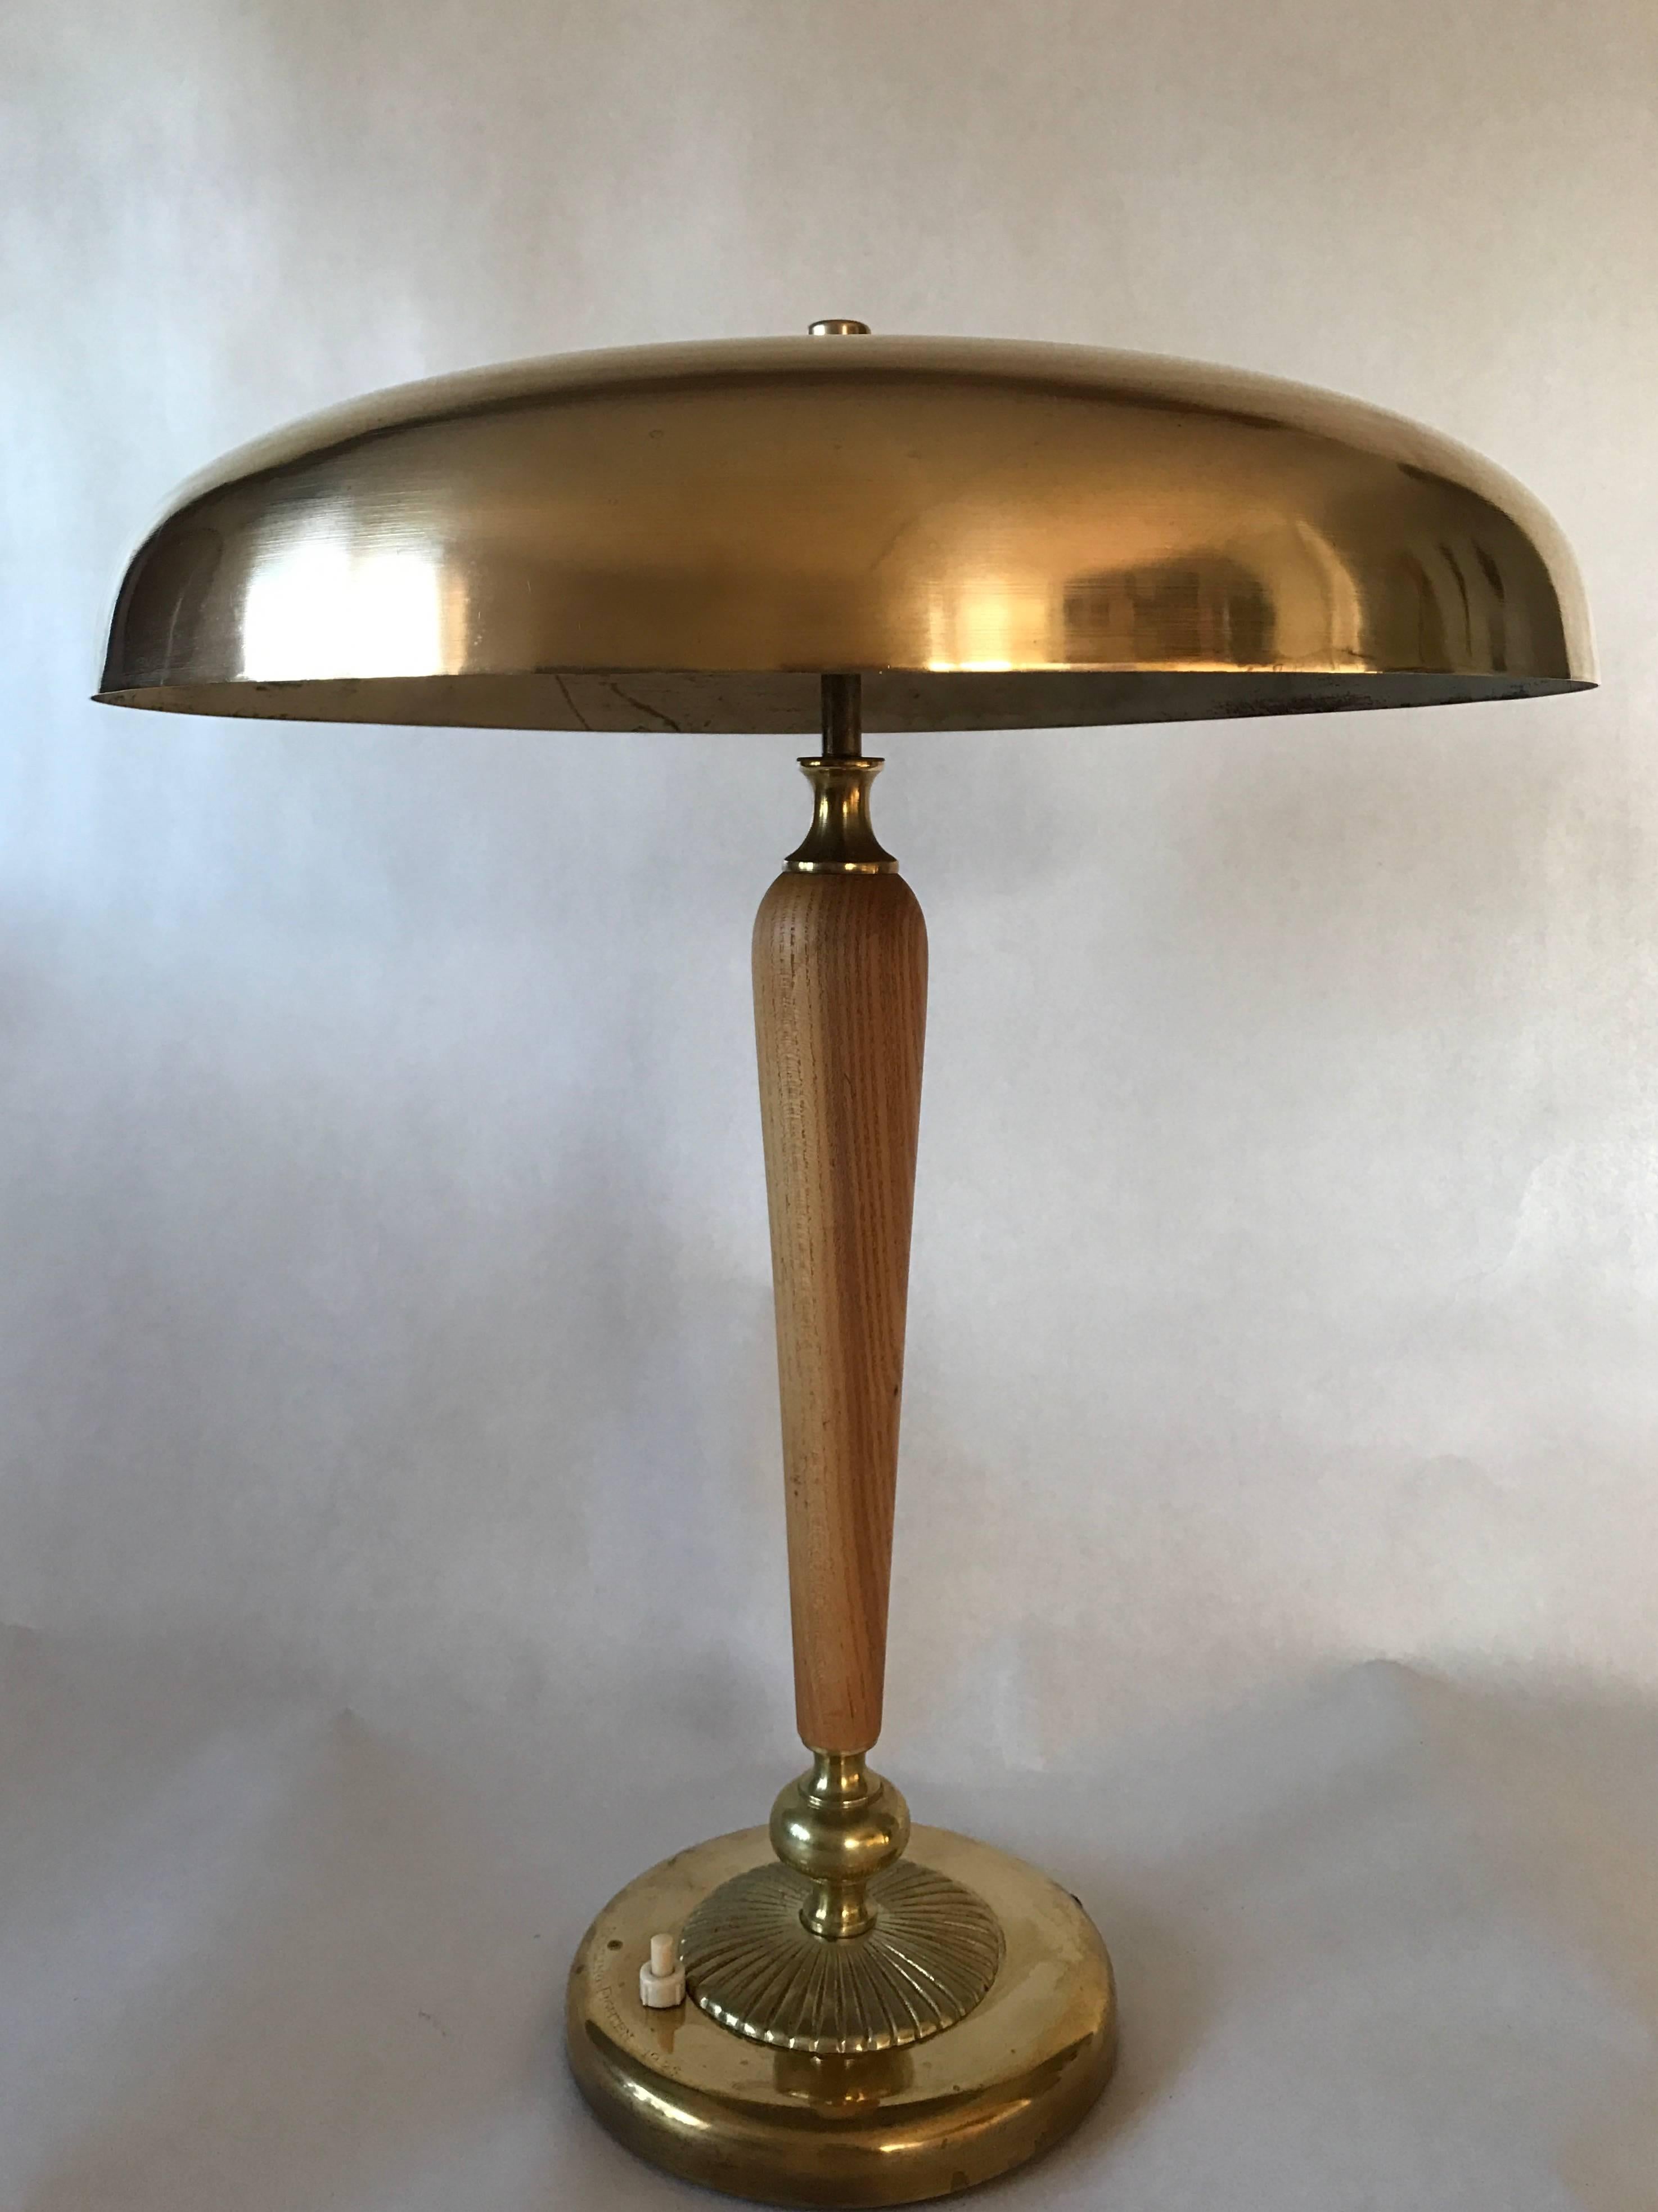 A very nice large Swedish brass table lamp, most likely made circa 1935. The foot is made of beech and brass, all cords has been replaced with new. Measure: The height is 50cm and the diameter of the shade is 40cm. It has some minor bumps and dents,